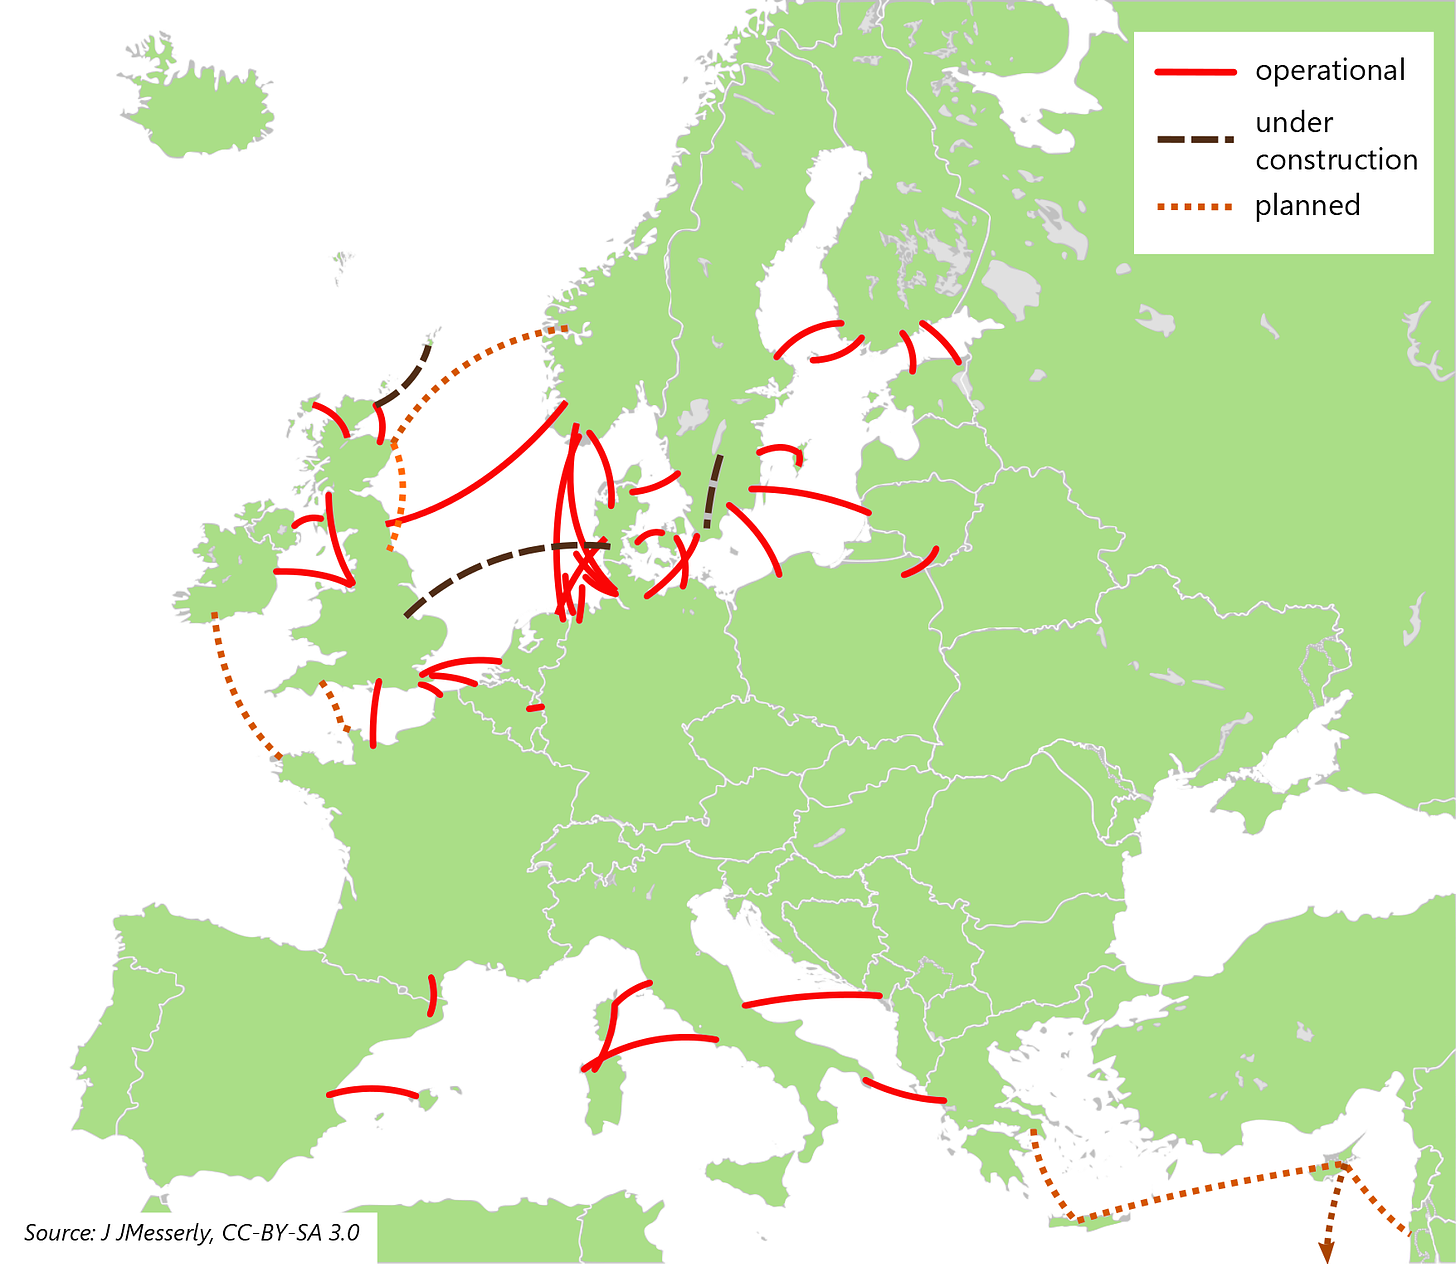 Map showing existing and proposed interconnectors in Europe